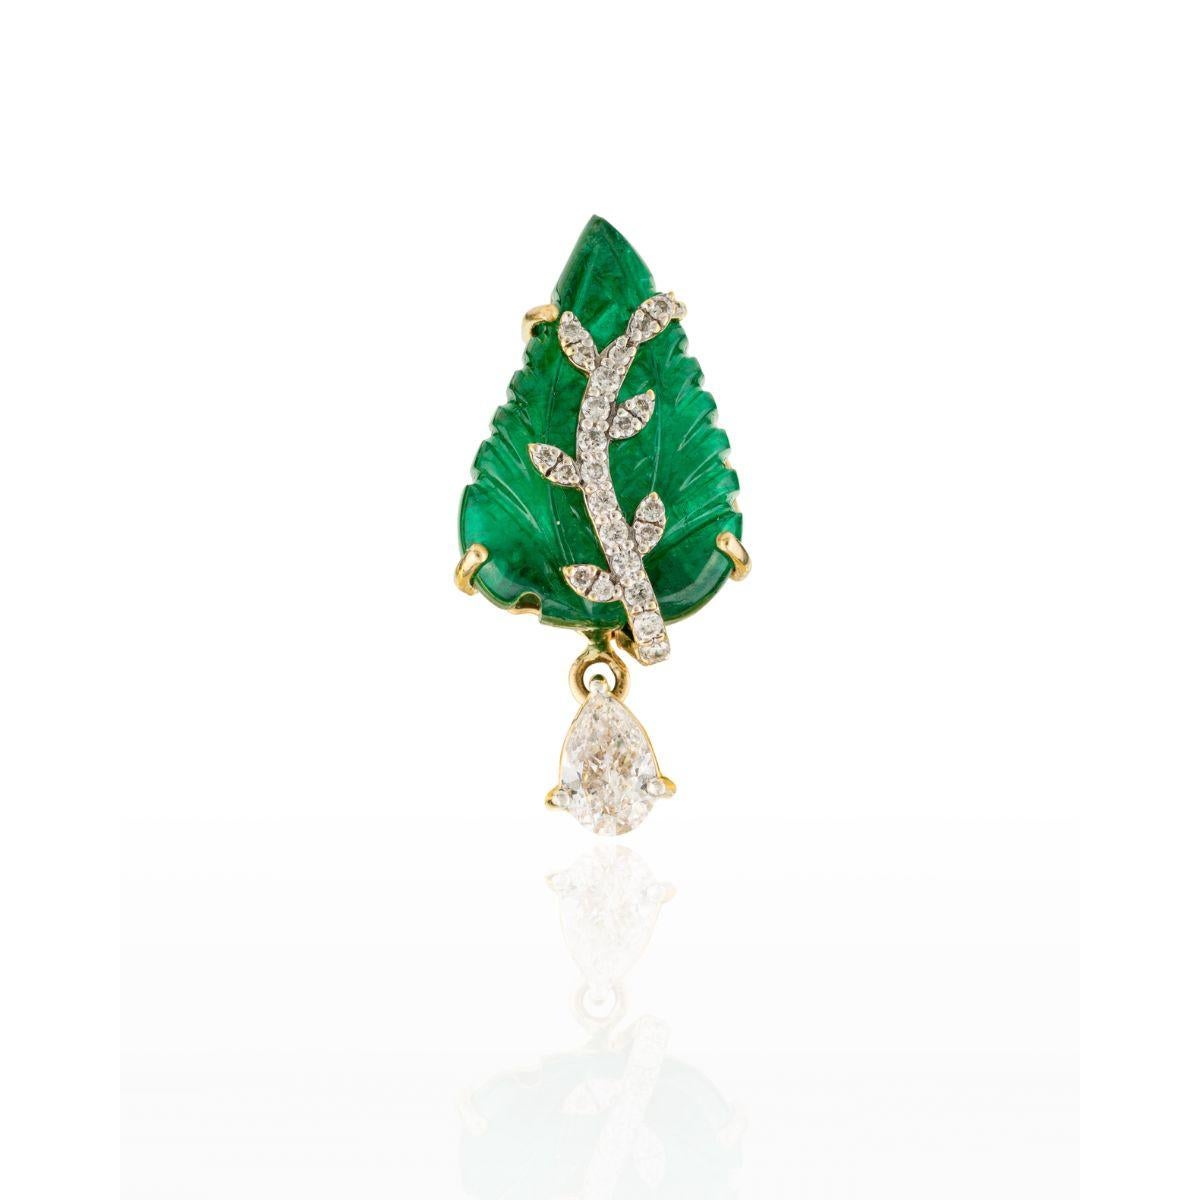 Unisex 9.99 Carat Carved Leaf Emerald Brooch with Diamonds in 18k Yellow Gold For Sale 2